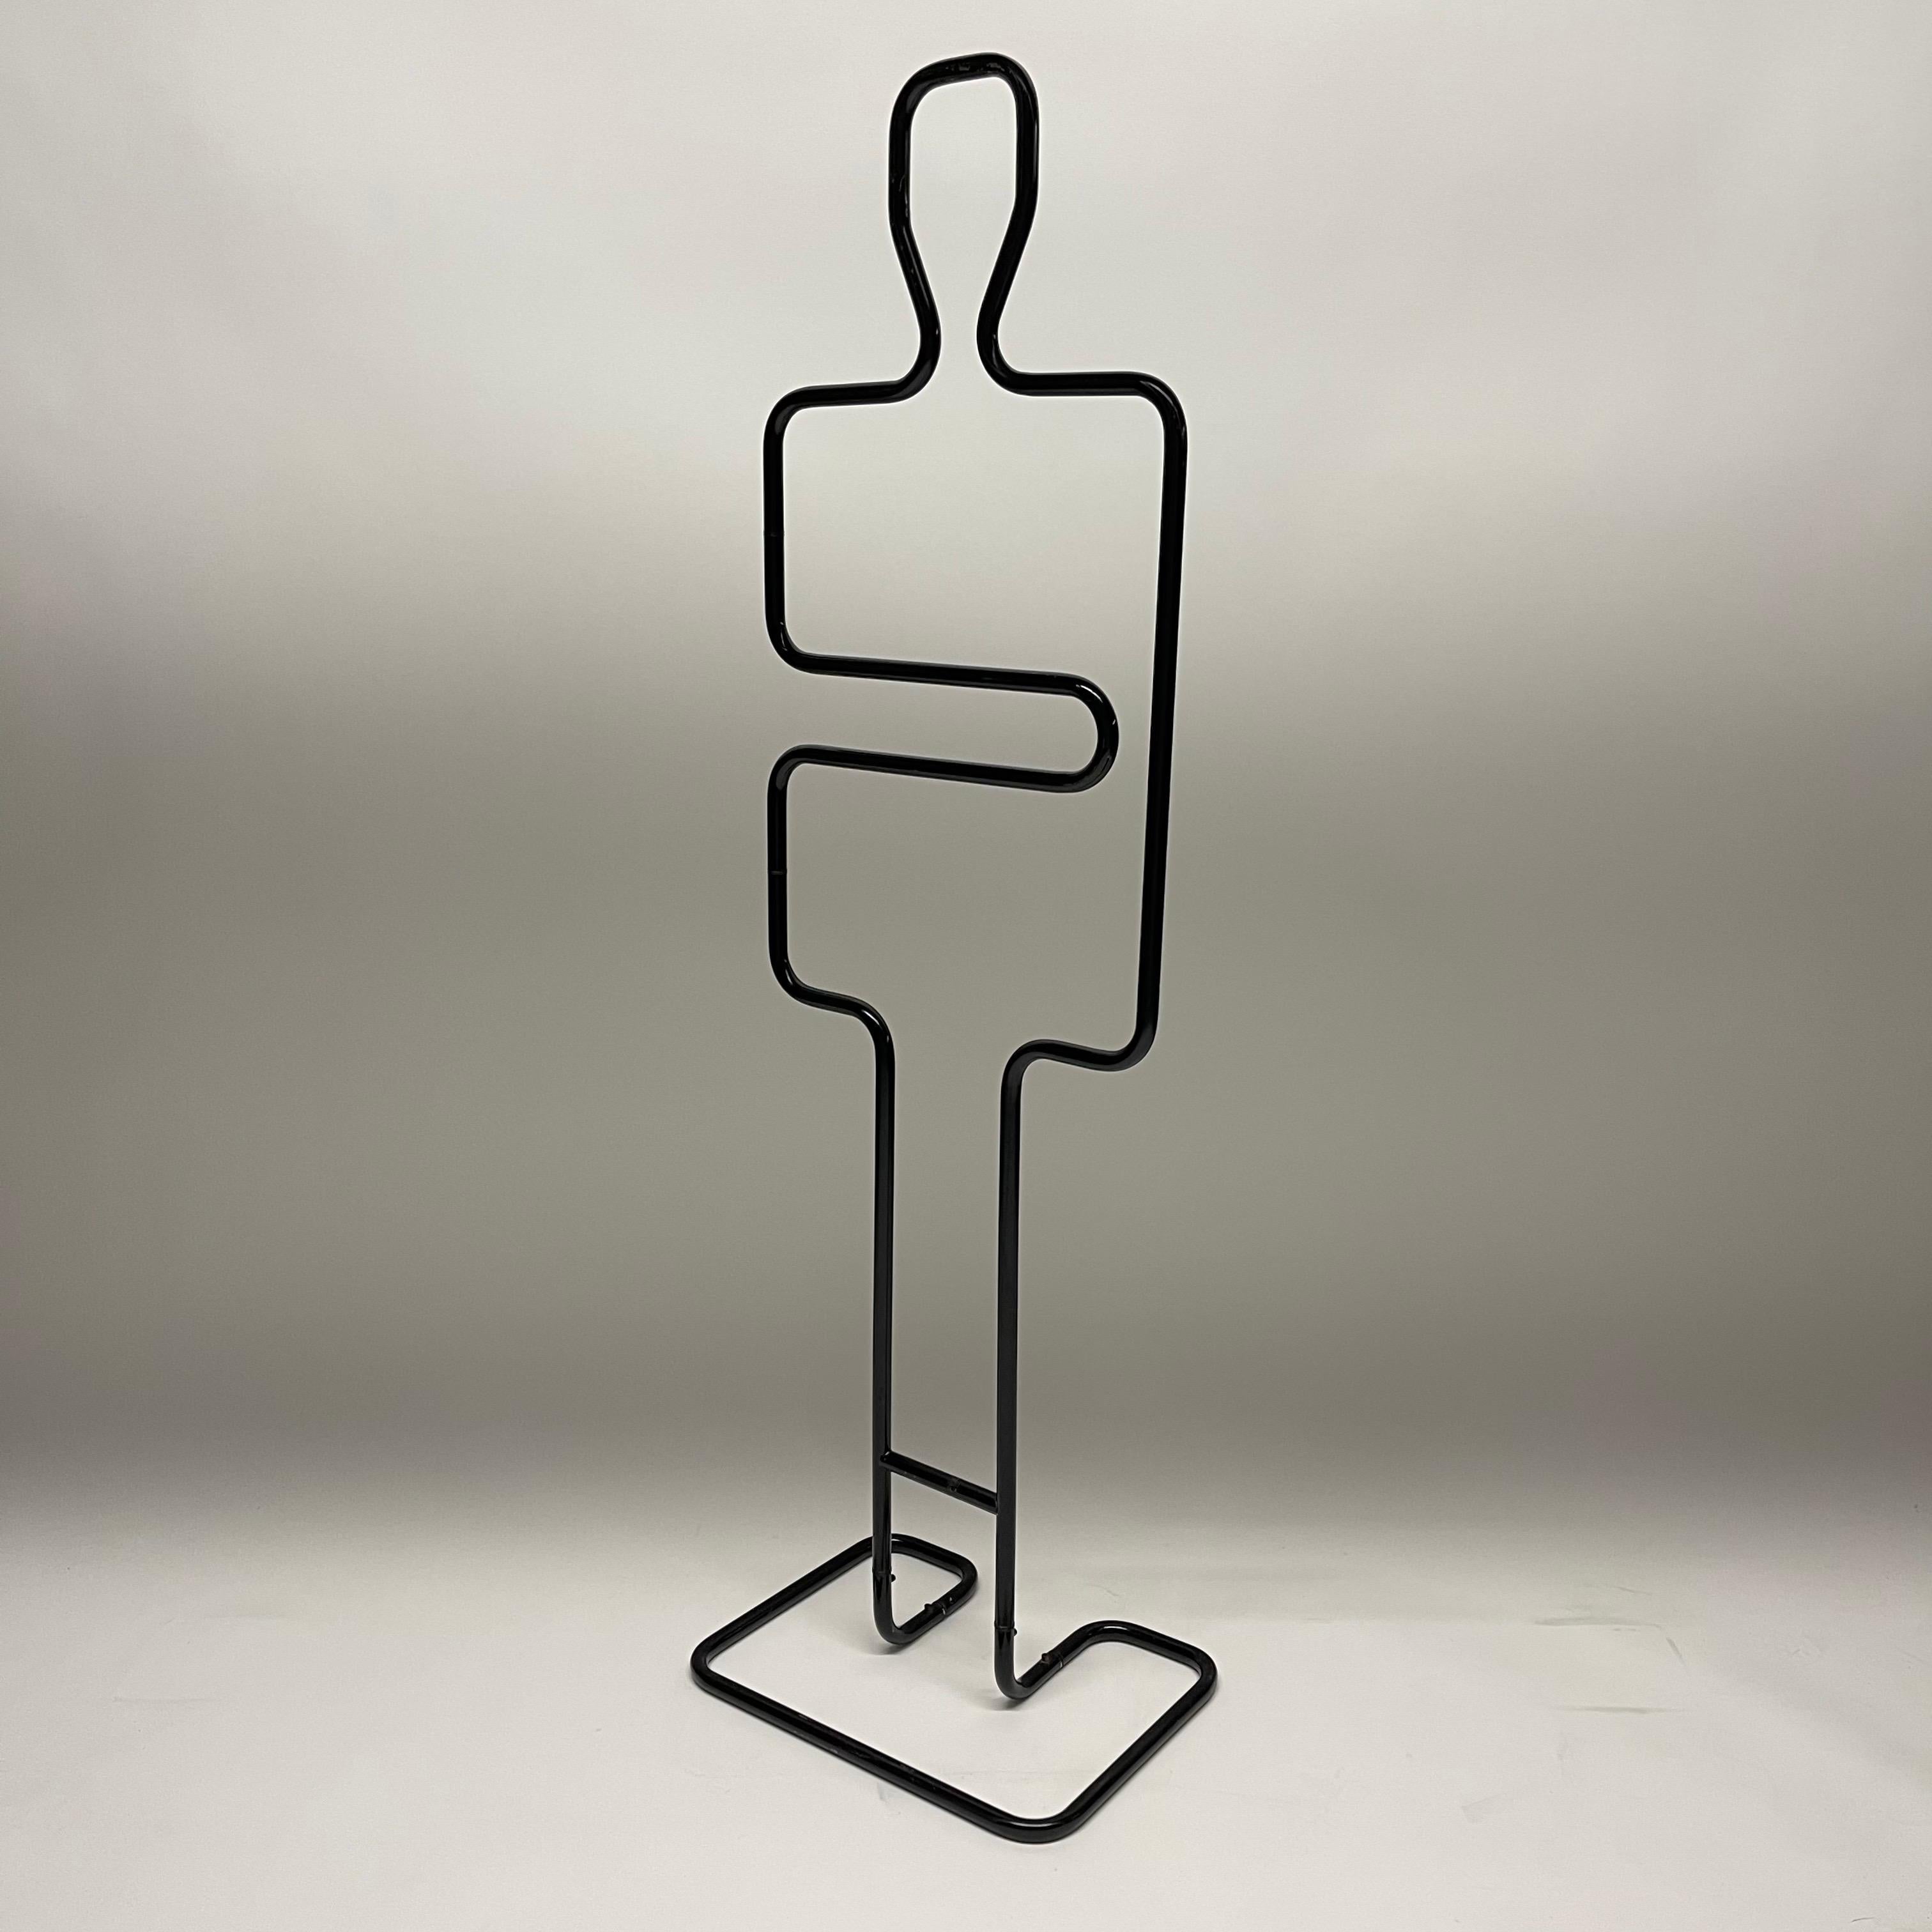 Figural Post Modern valet/coat or towel rack rendered in black powder coated steel with an articulating arm attributed to Pierre Cardin.